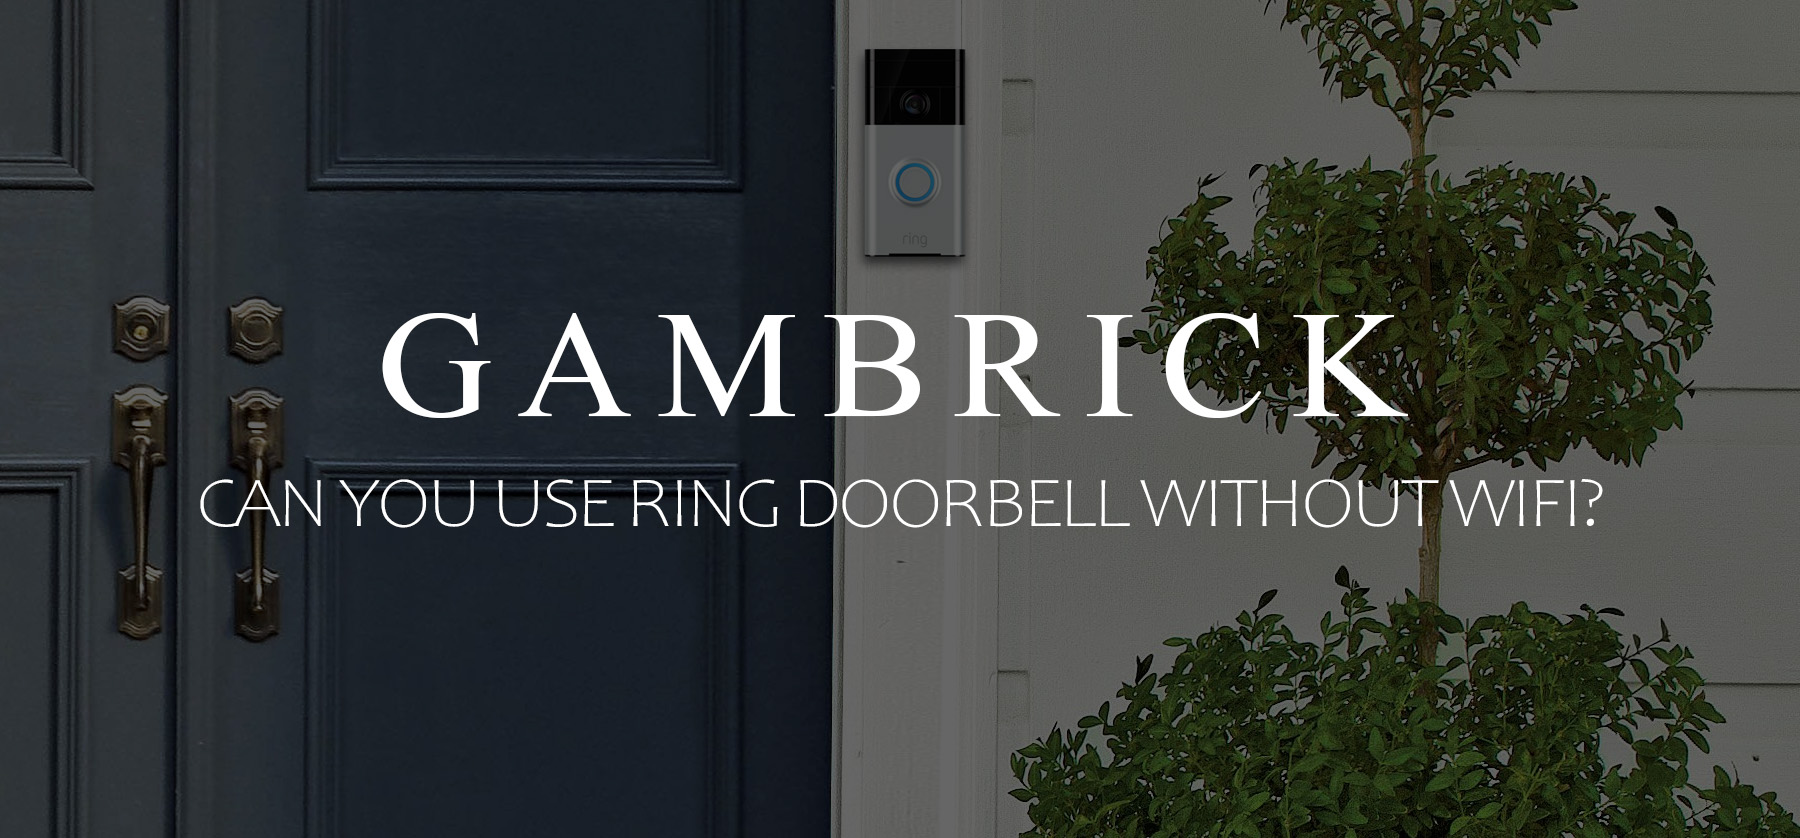 can you use ring doorbell without wifi banner